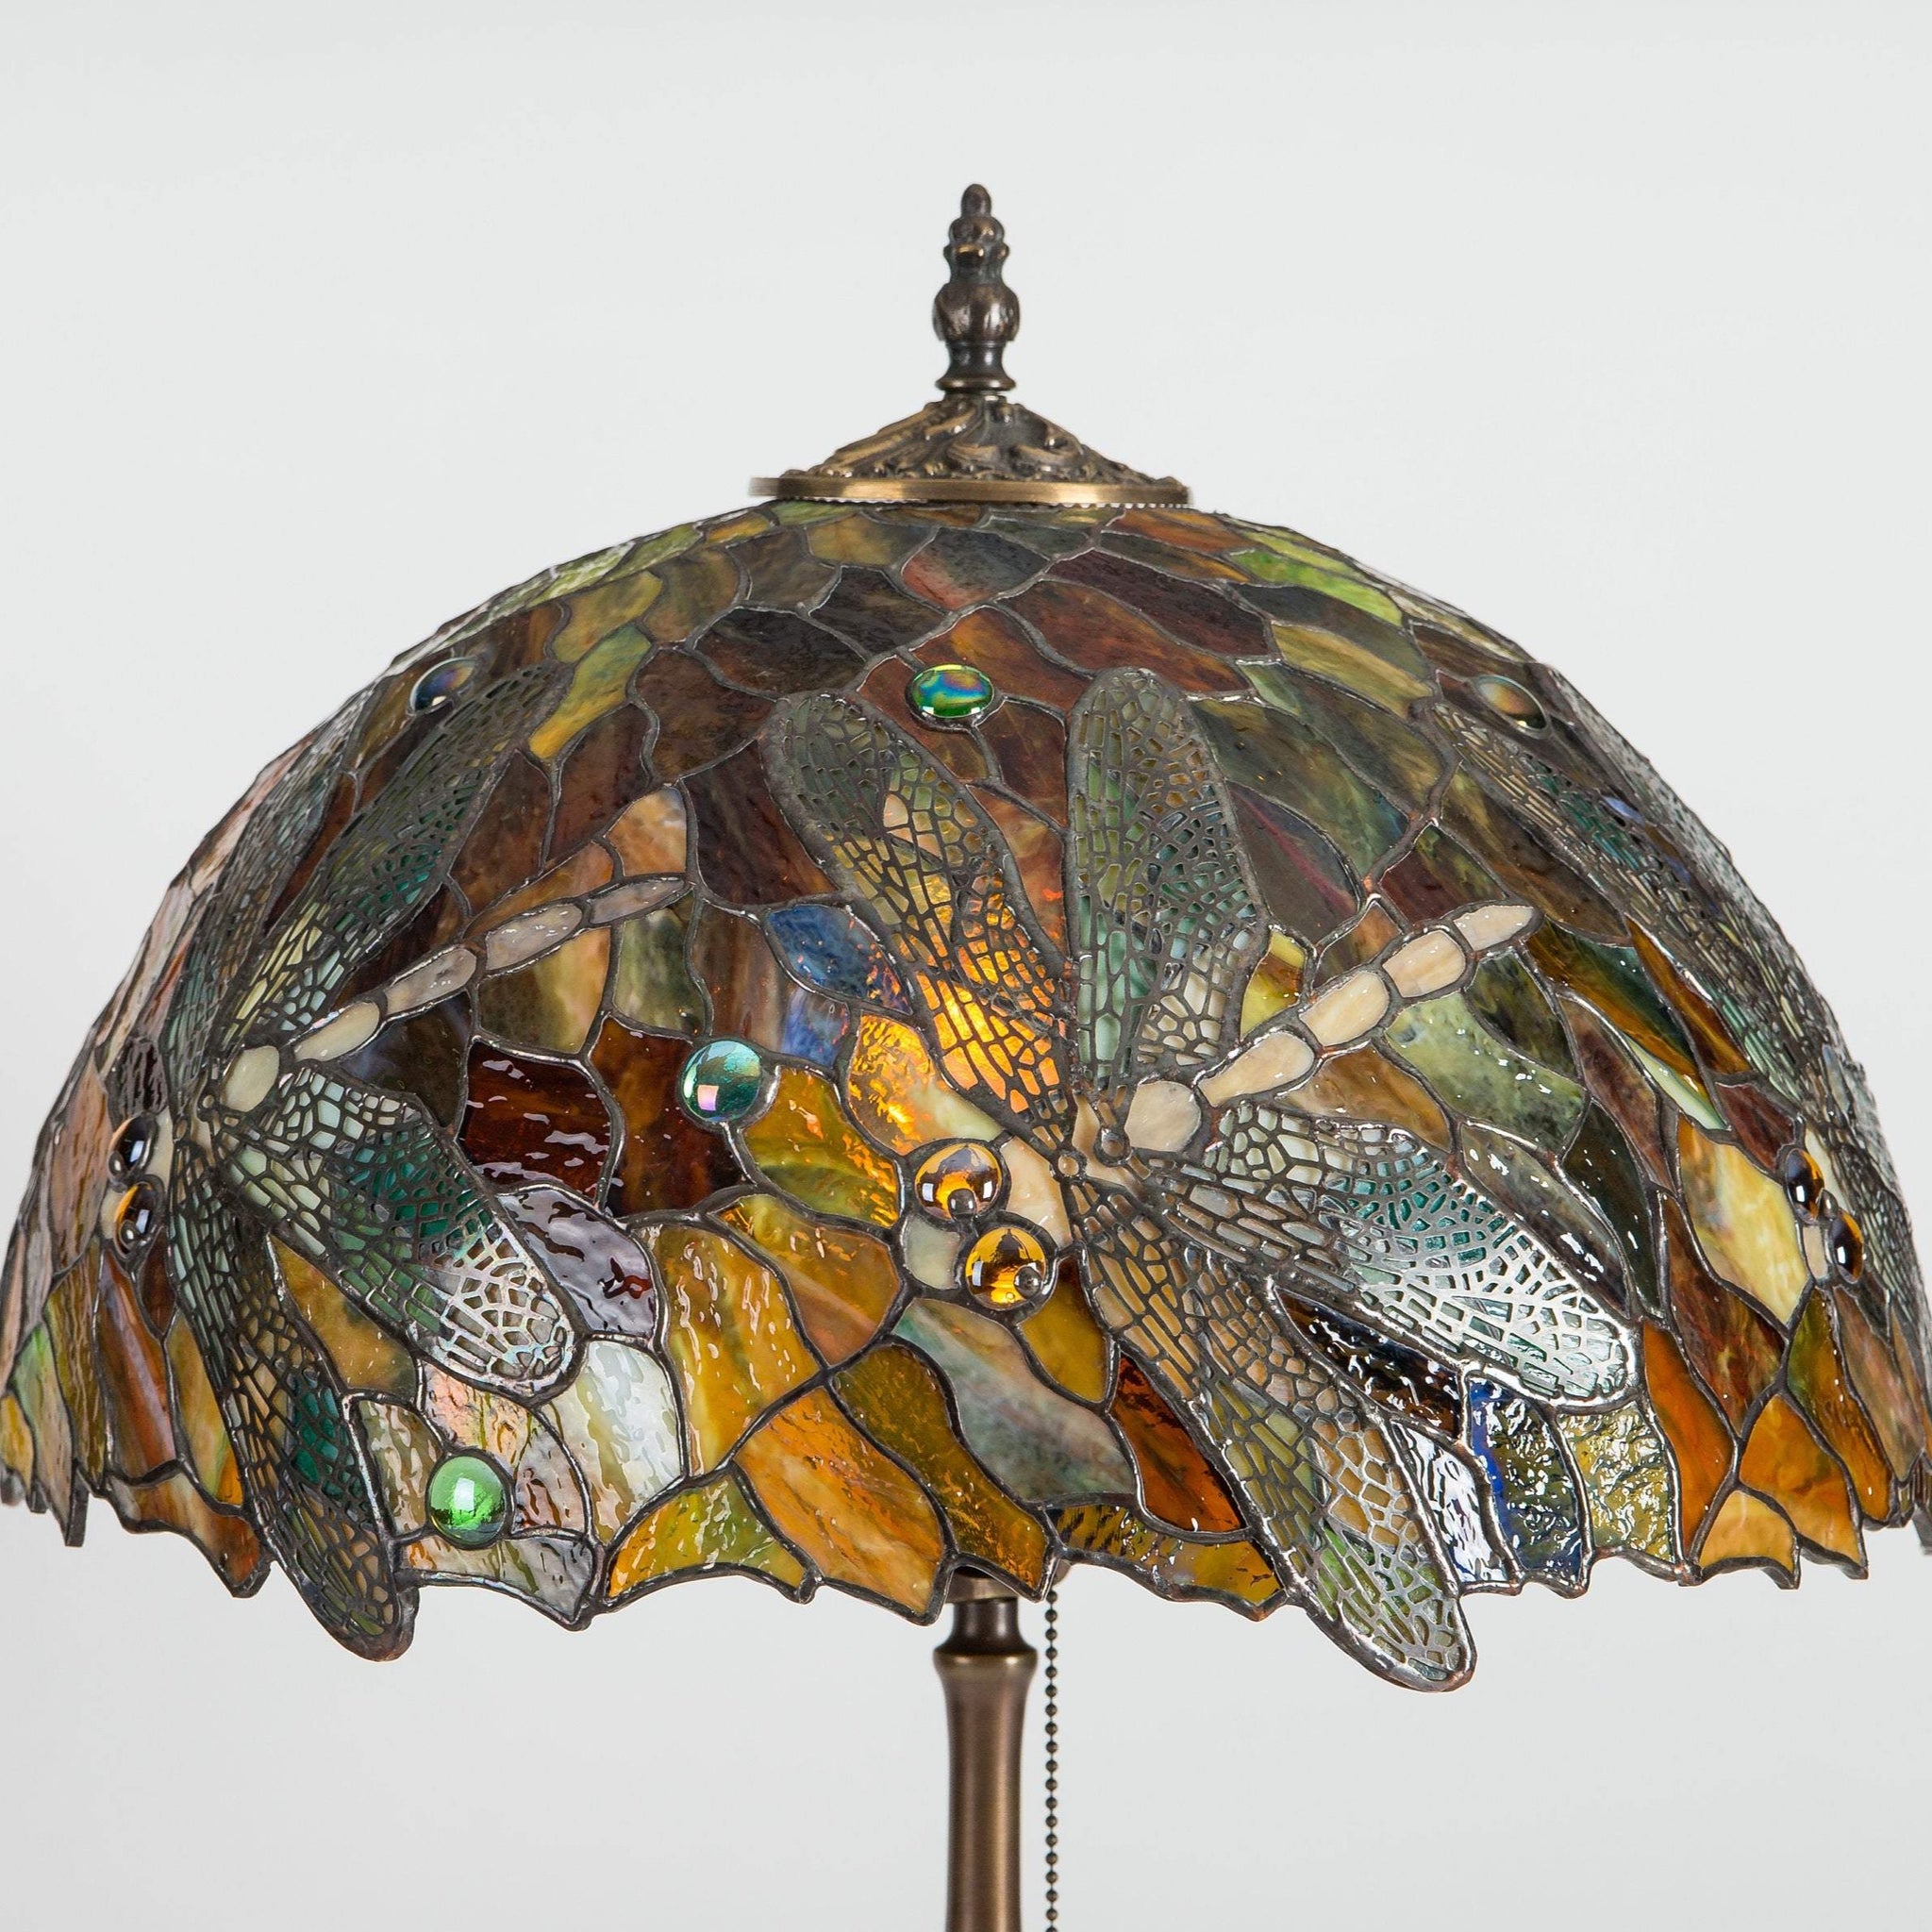 Stained Glass Lamp With Dragonflies - Michael Gabel blog